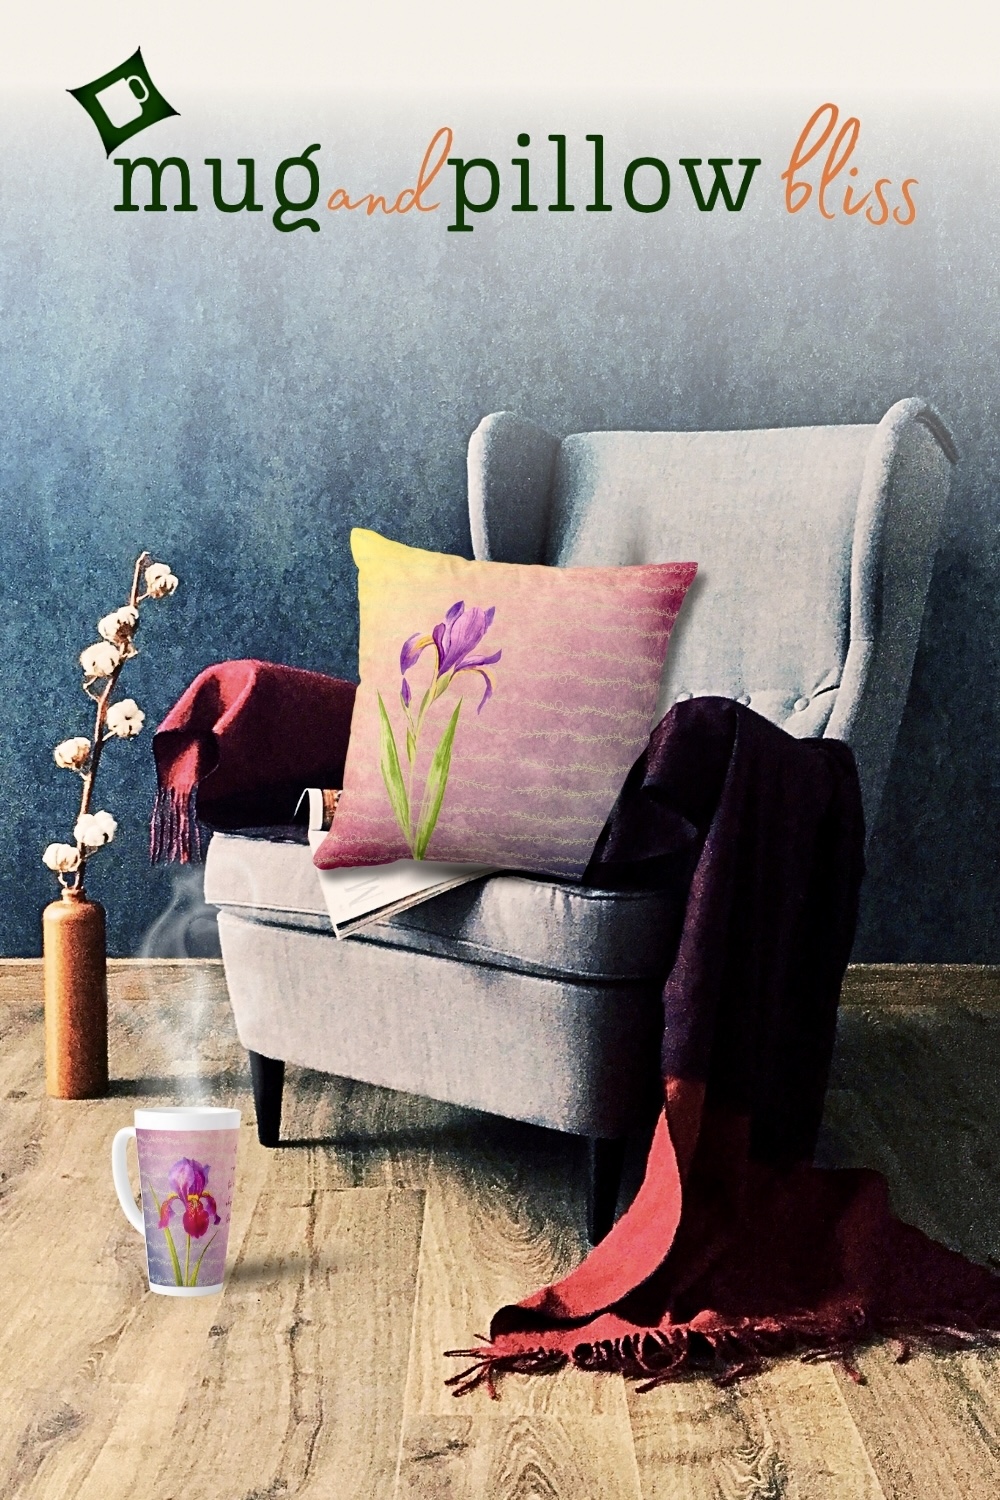 Cozy snug room featuring a violet floral pillow and a latte mug with the same design, creating a harmonious and inviting atmosphere.